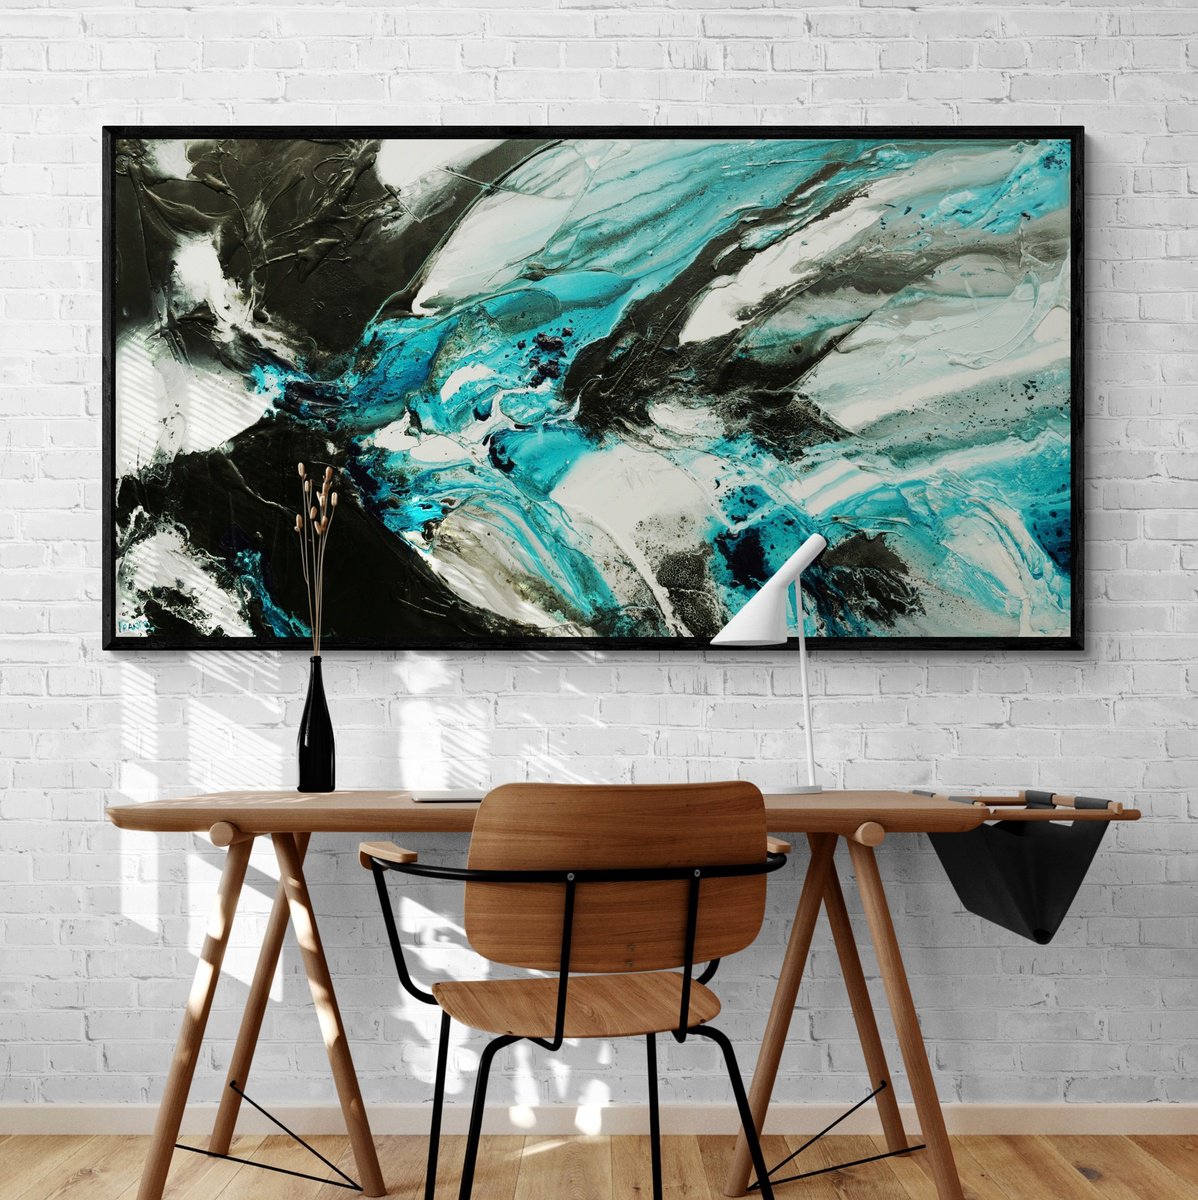 Southern Nero 190cm x 100cm Textured Abstract Art by Franko